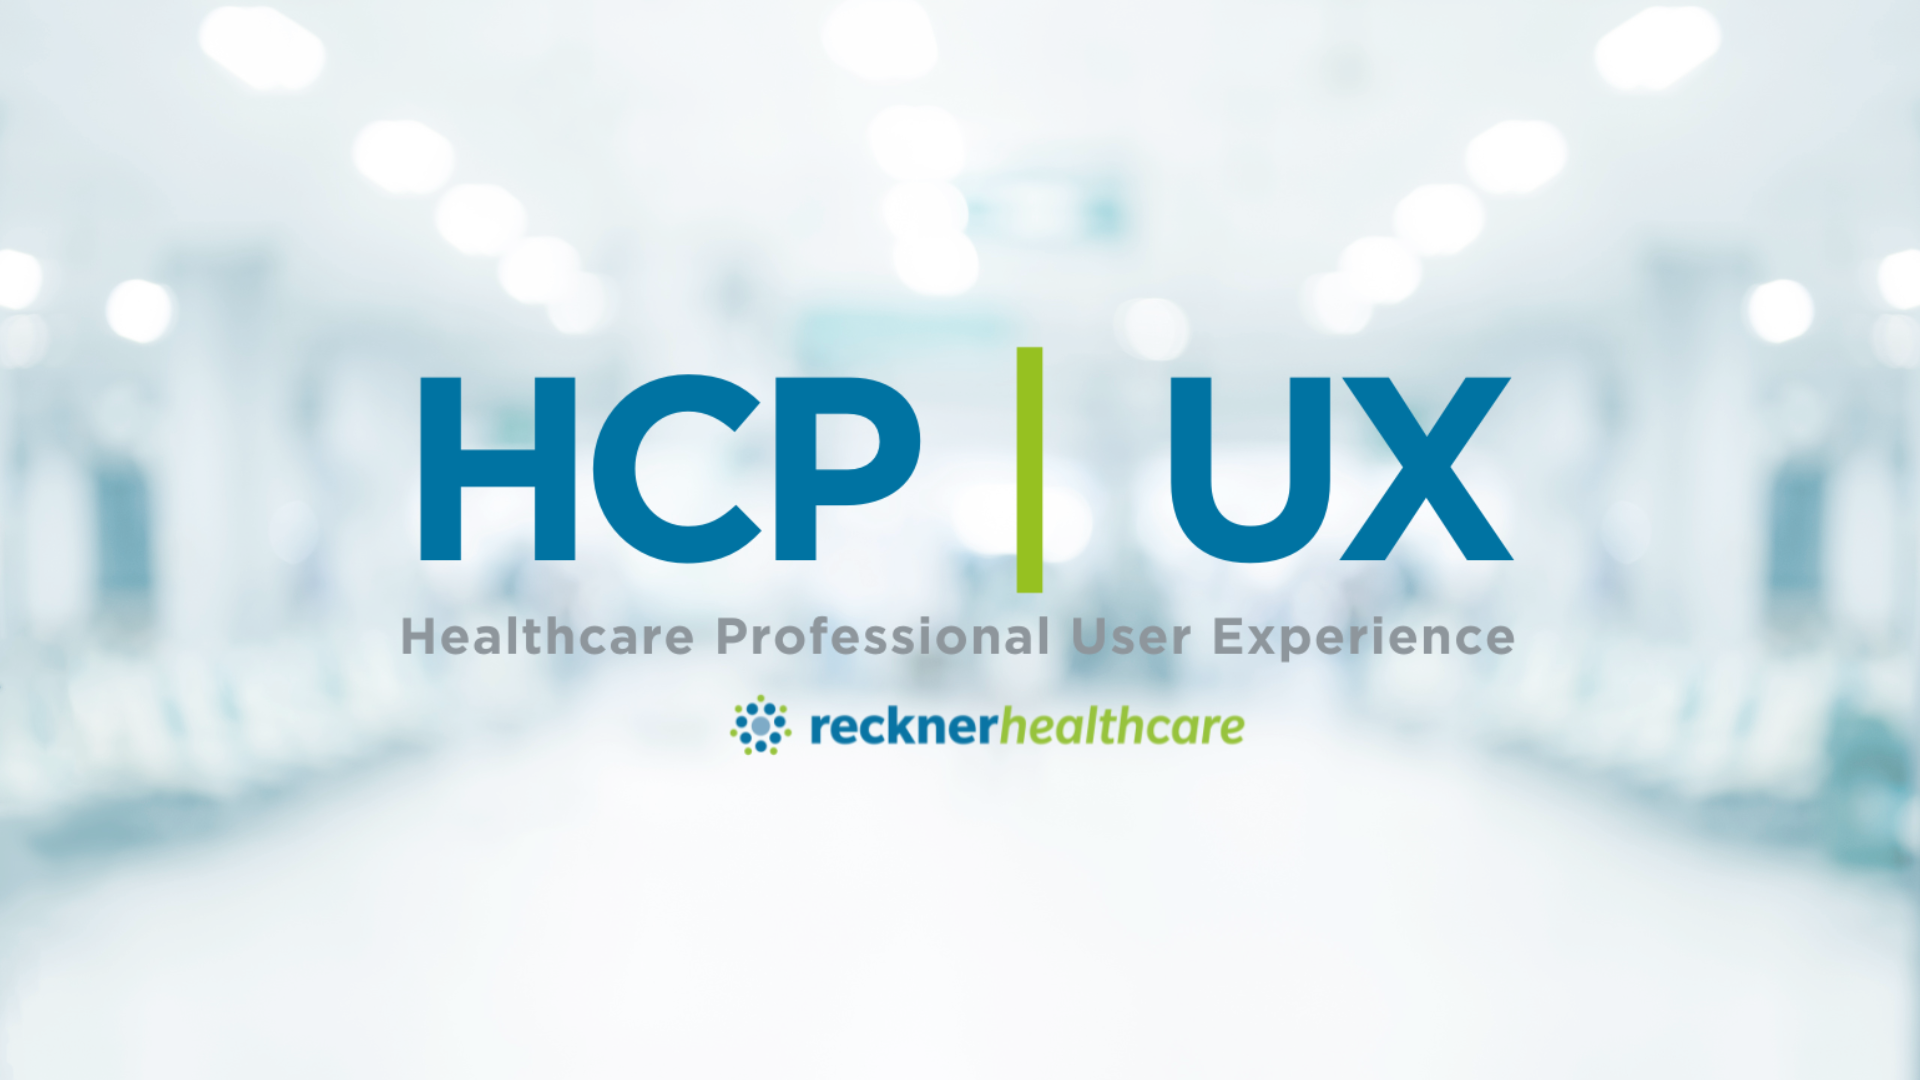 Healthcare Professional User Experience